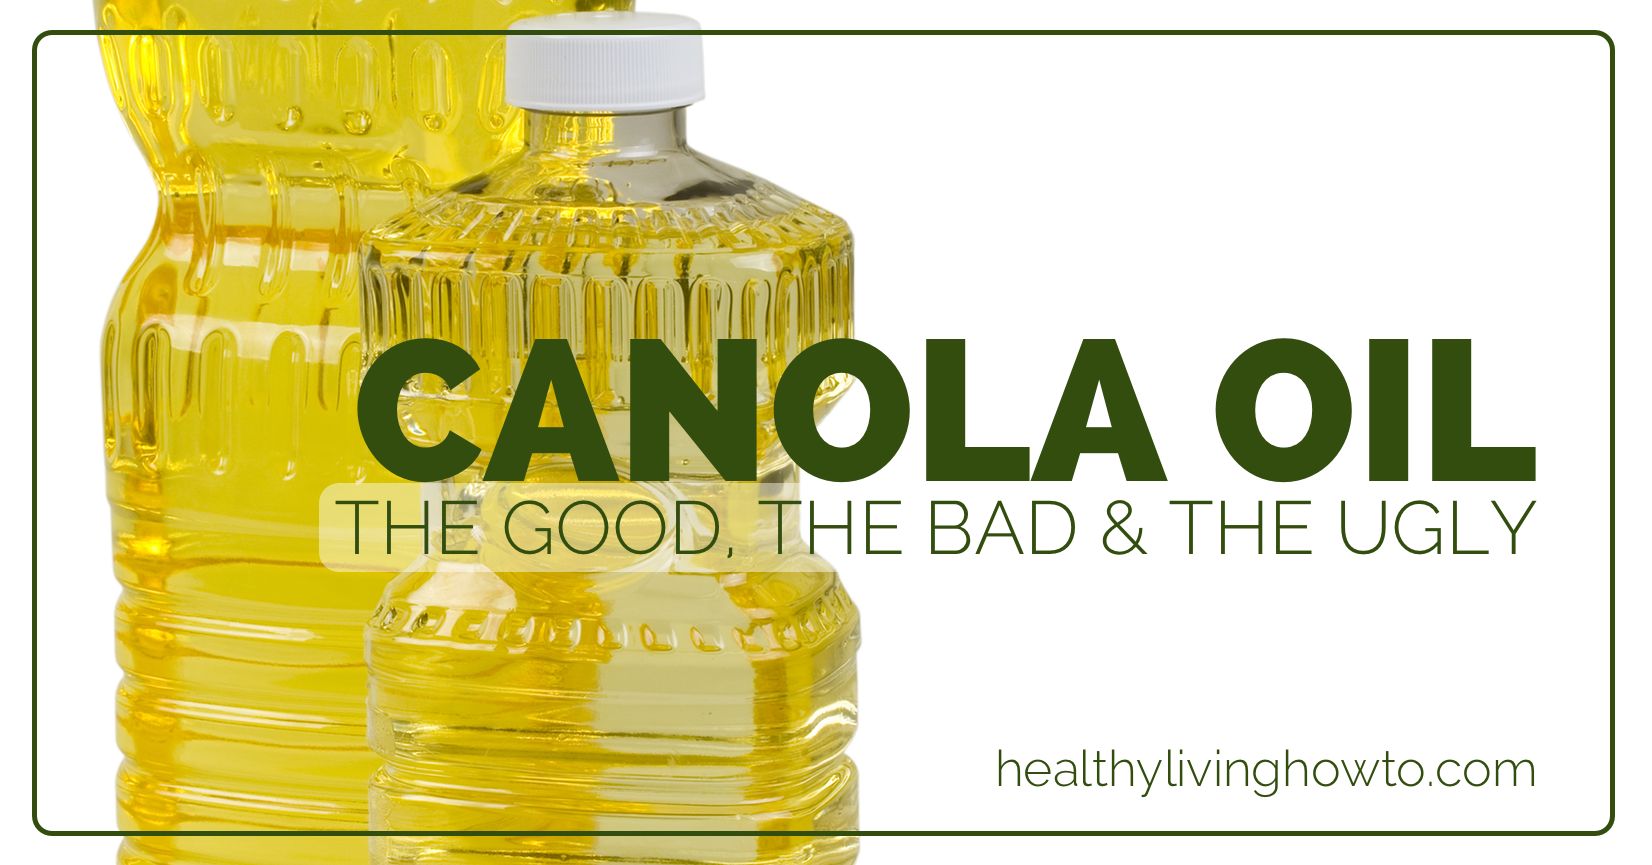 Canola Oil: The Good, The Bad, The Ugly | healthylivinghowto.com